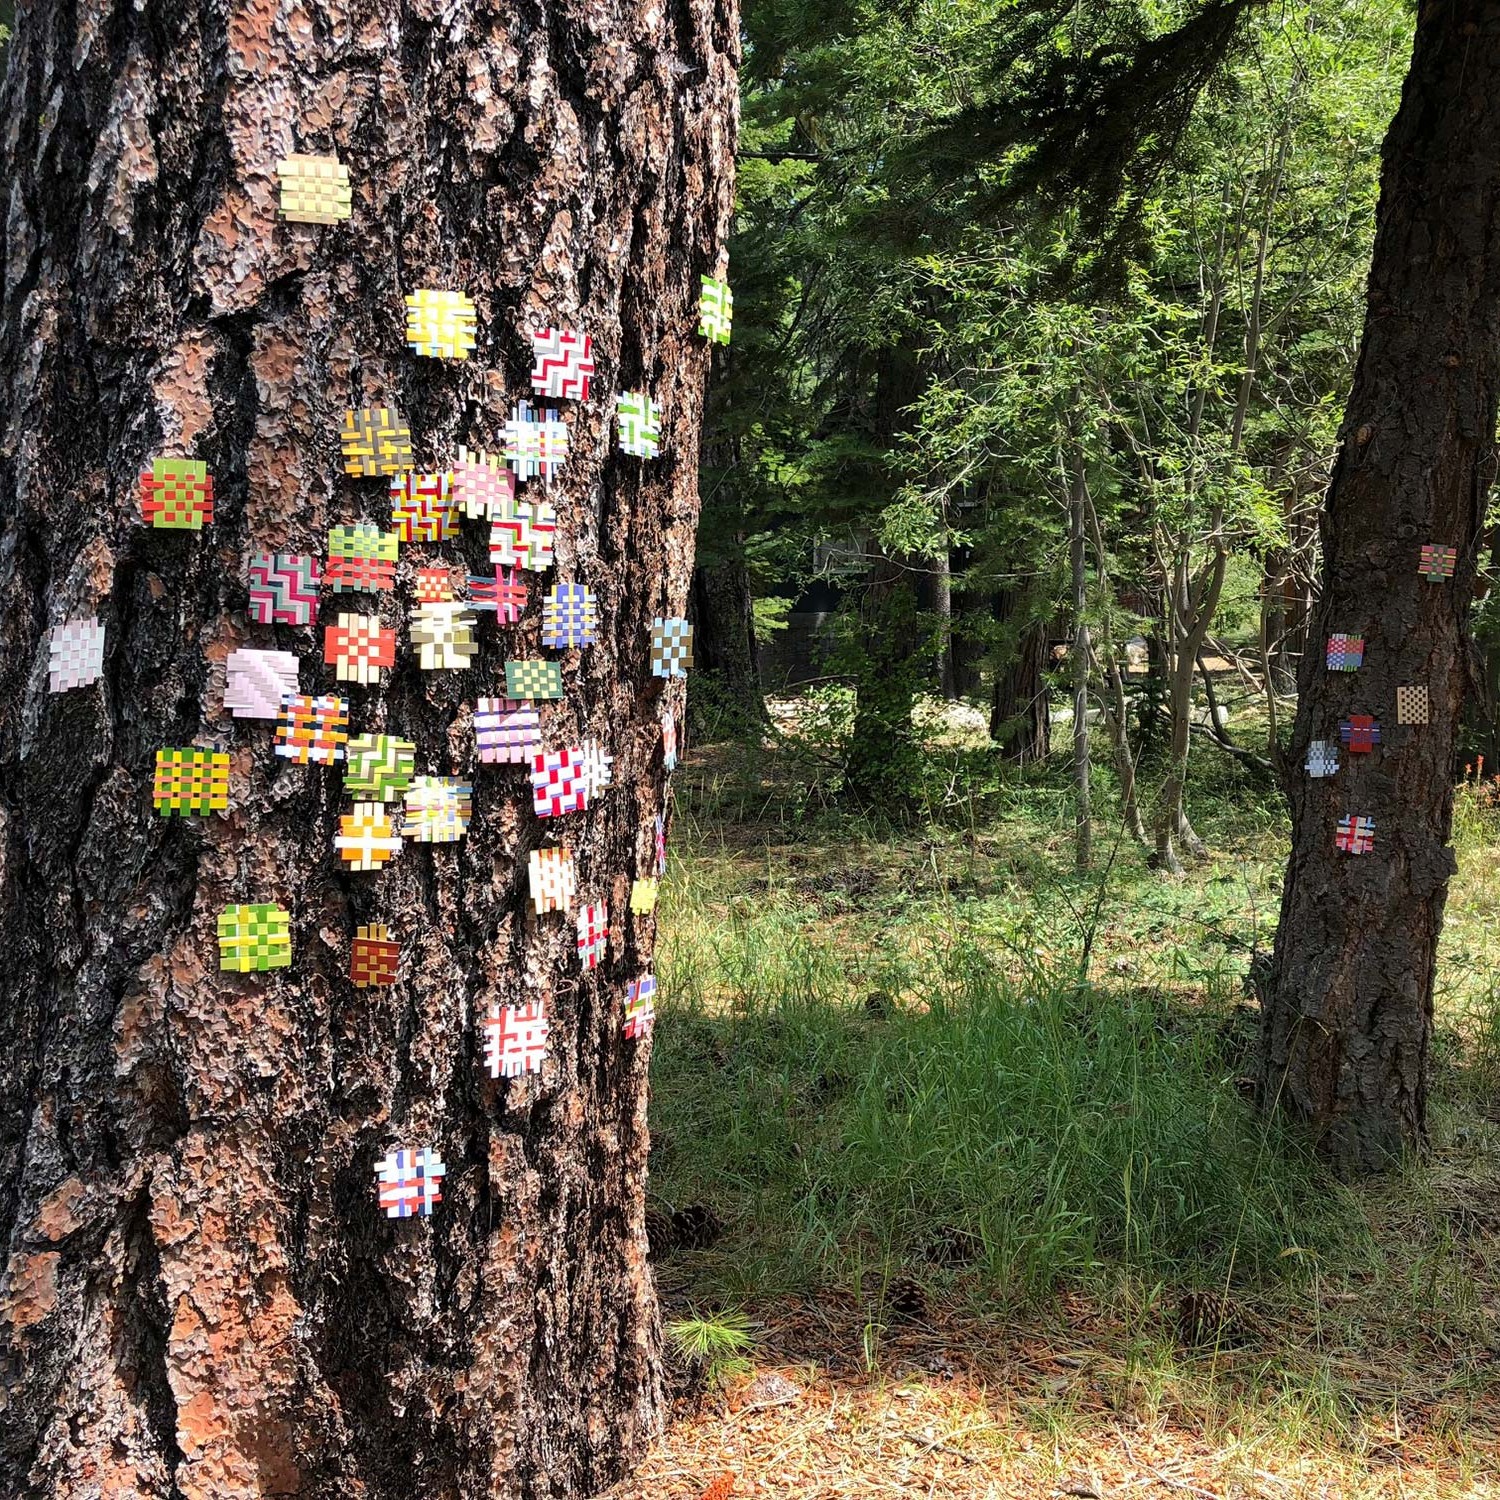 Installation View 2 - 2018 | Found paper on tree | Lake Tahoe, CA